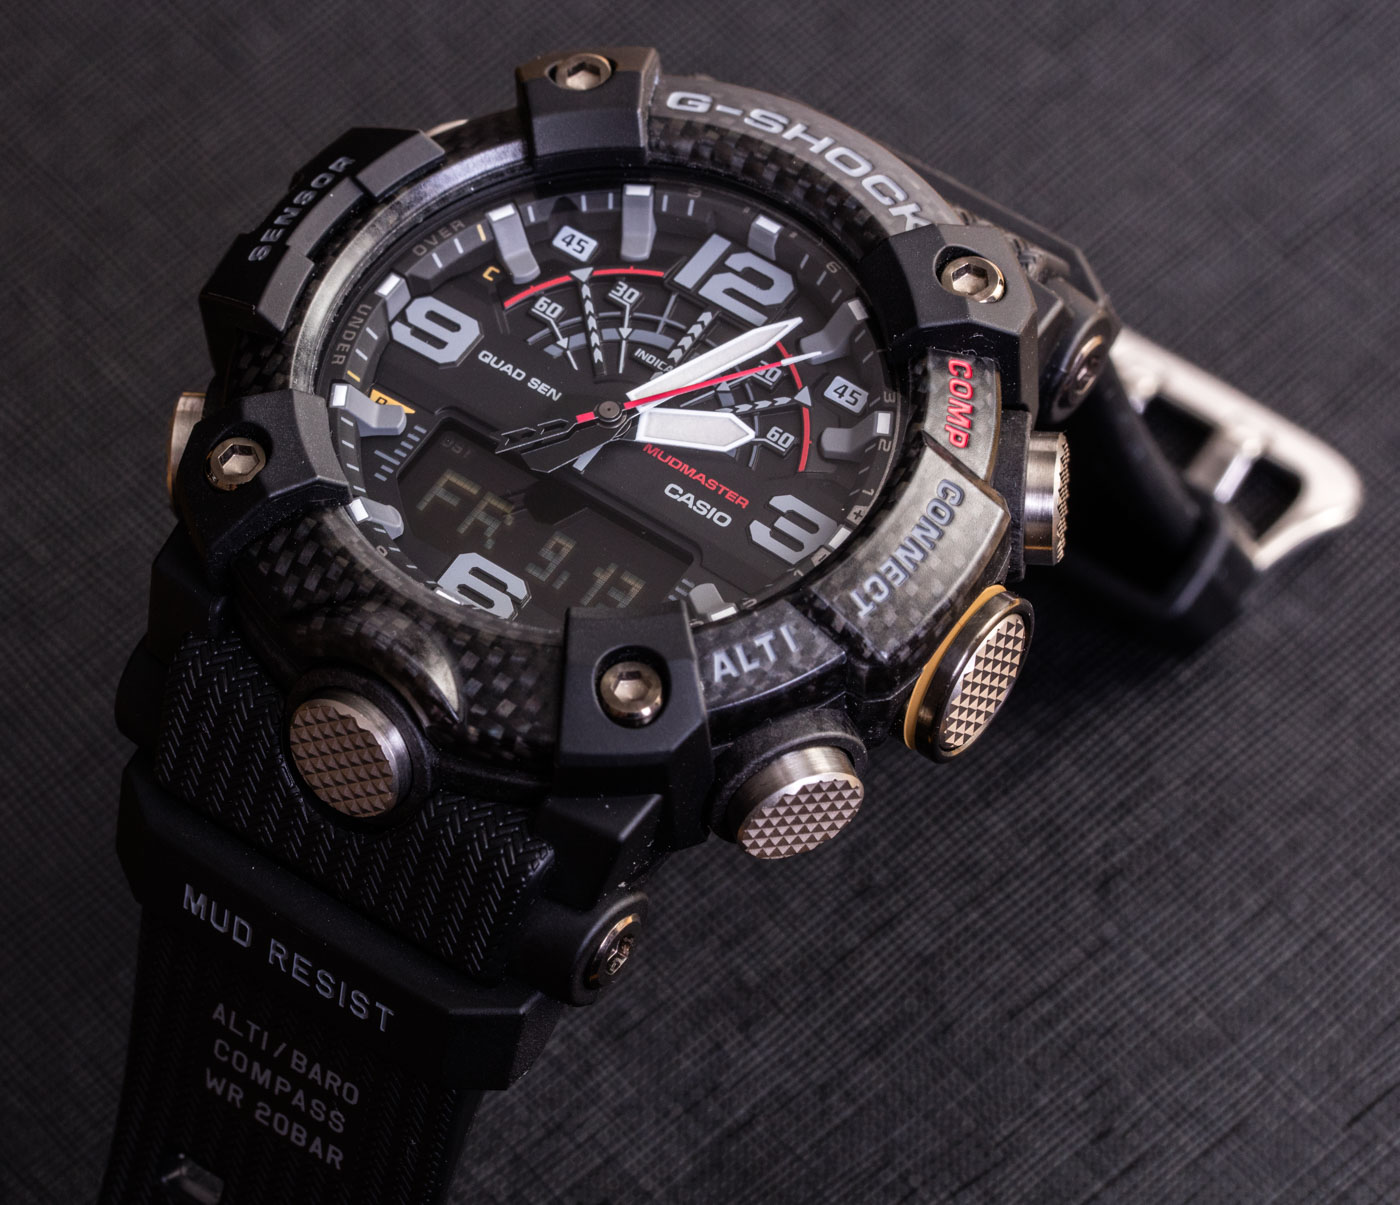 Casio G-Shock Mudmaster GG-B100 Watch Full Of Style, Value, Features | aBlogtoWatch